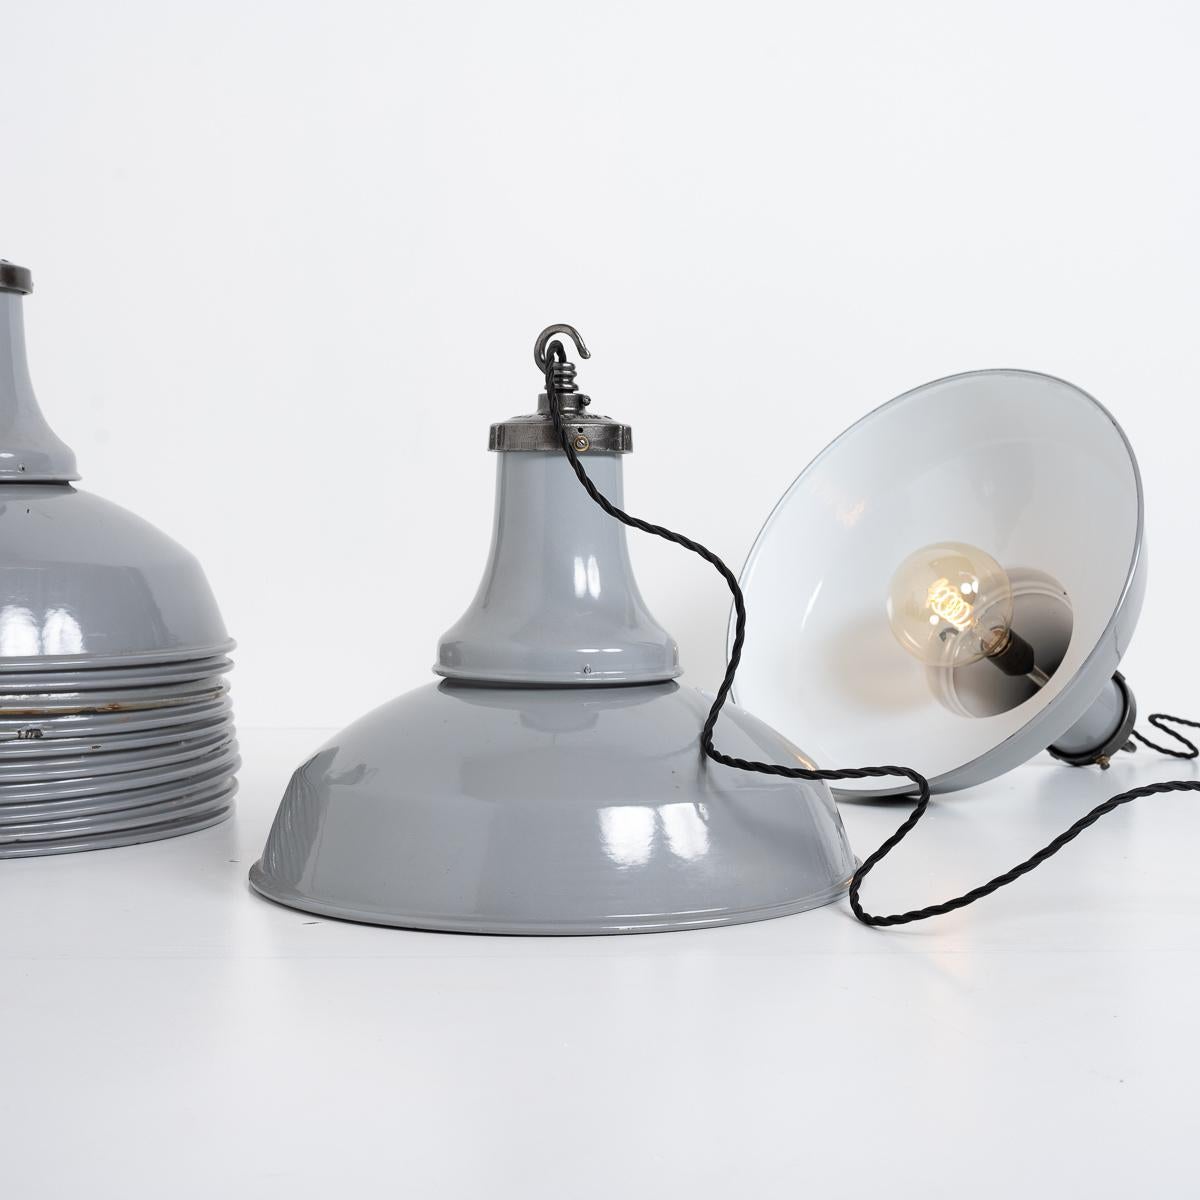 Reclaimed Industrial Vitreous Enamelled Pendant Lights by Benjamin Electric For Sale 3